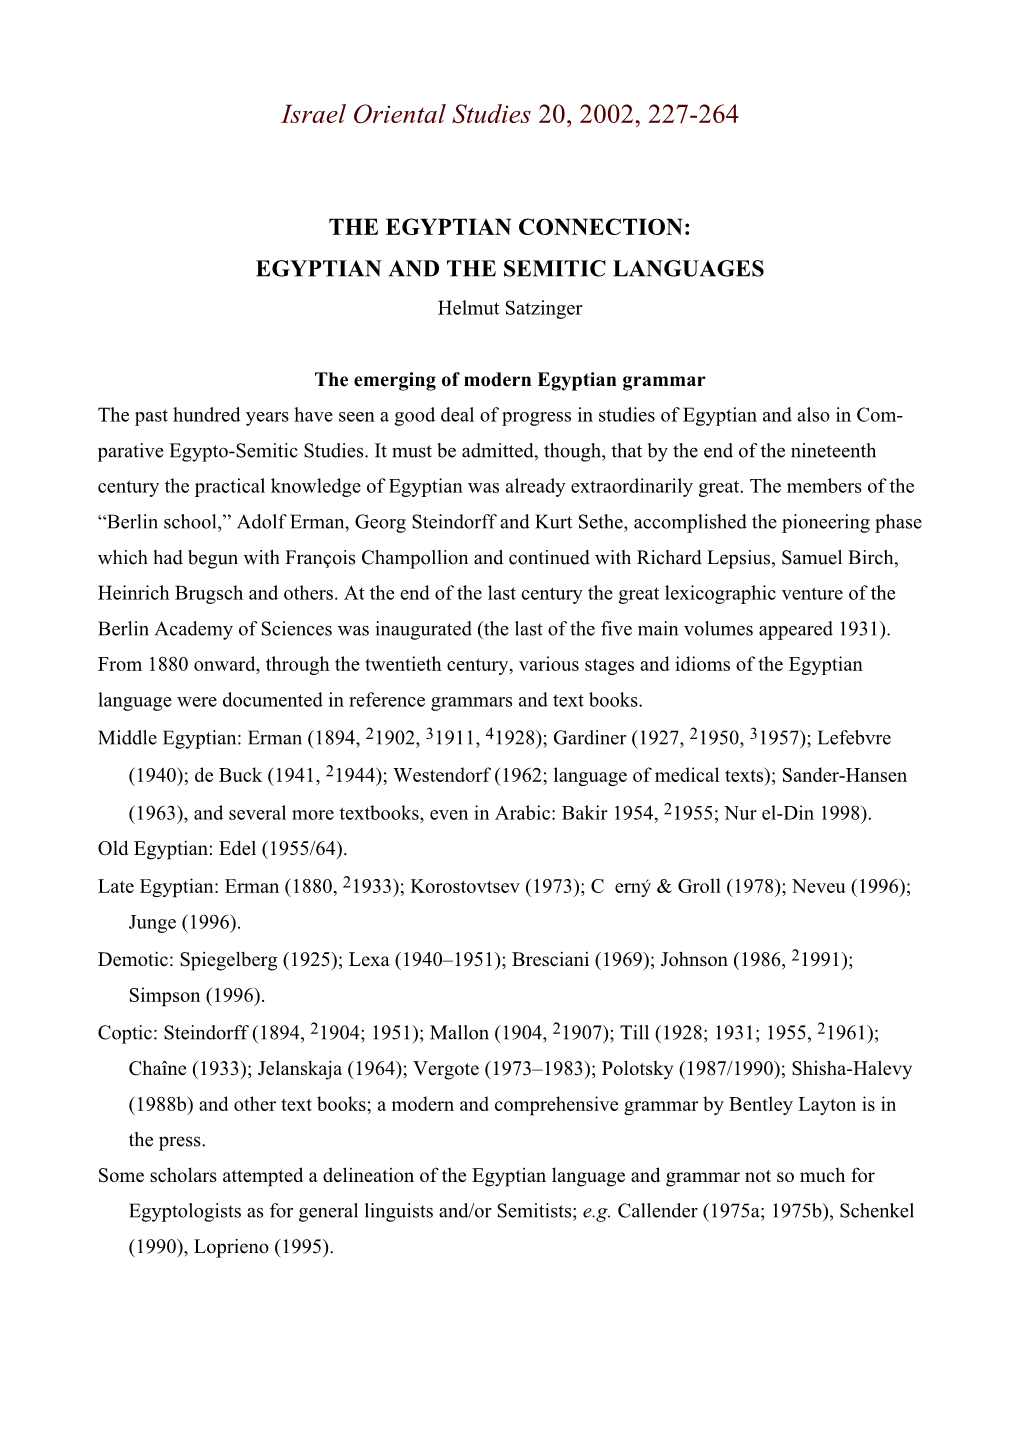 EGYPTIAN and the SEMITIC LANGUAGES Helmut Satzinger